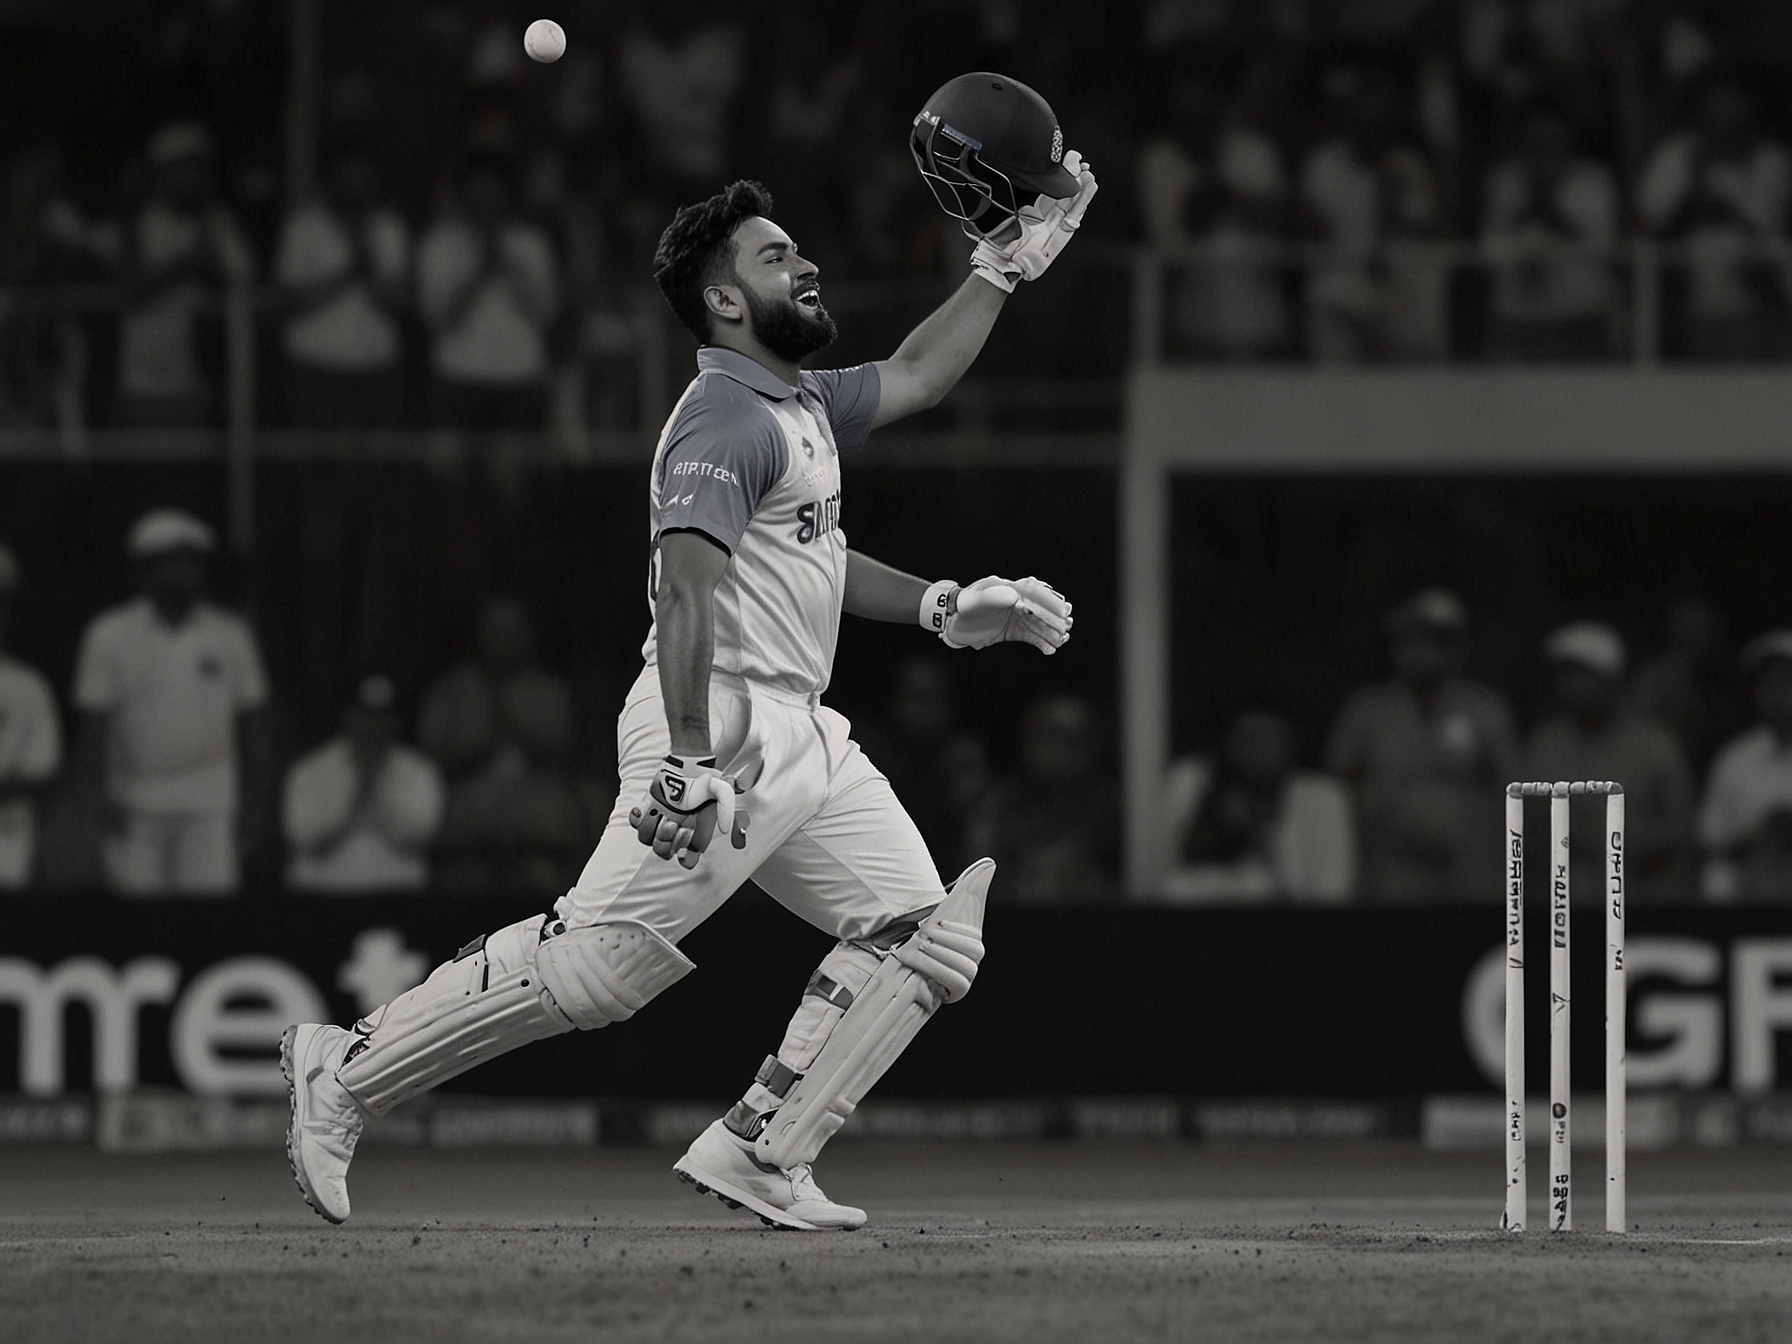 A relieved Rishabh Pant holds the ball after completing the catch with Rohit Sharma standing nearby, highlighting their quick reflexes and coordination during the near-miss incident.